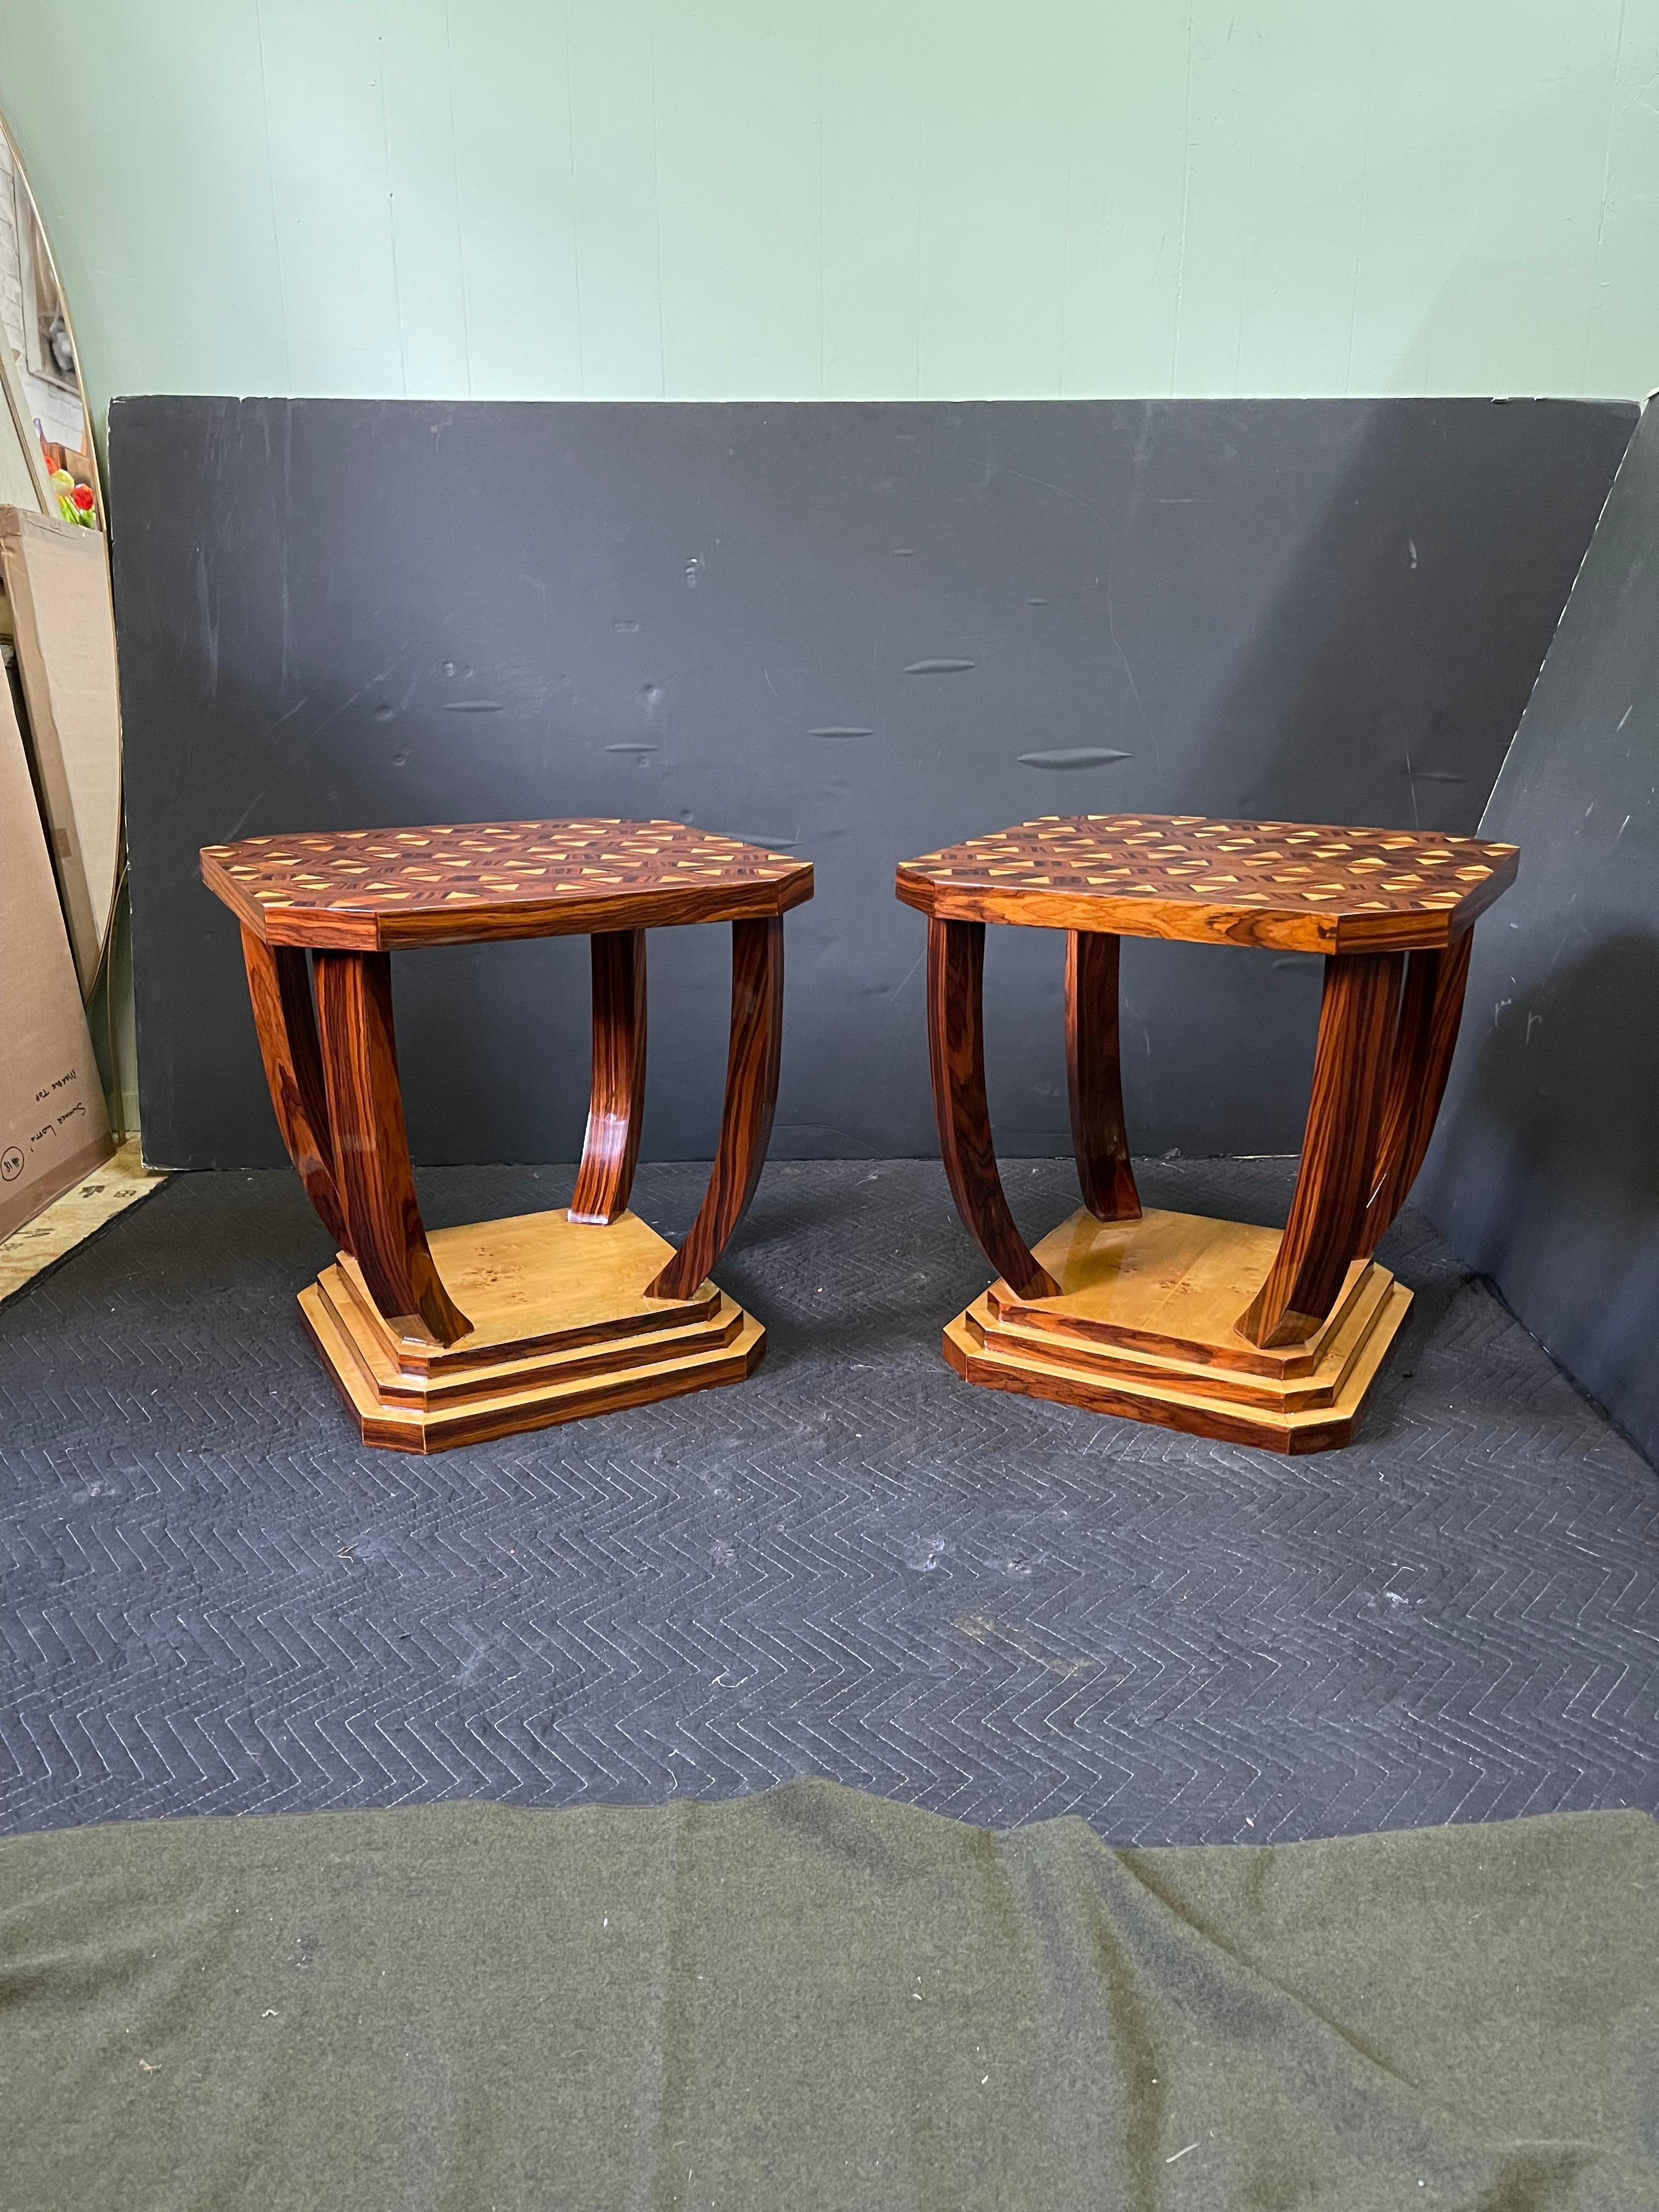 20th Century French Art Deco Style Burl Wood Side Tables